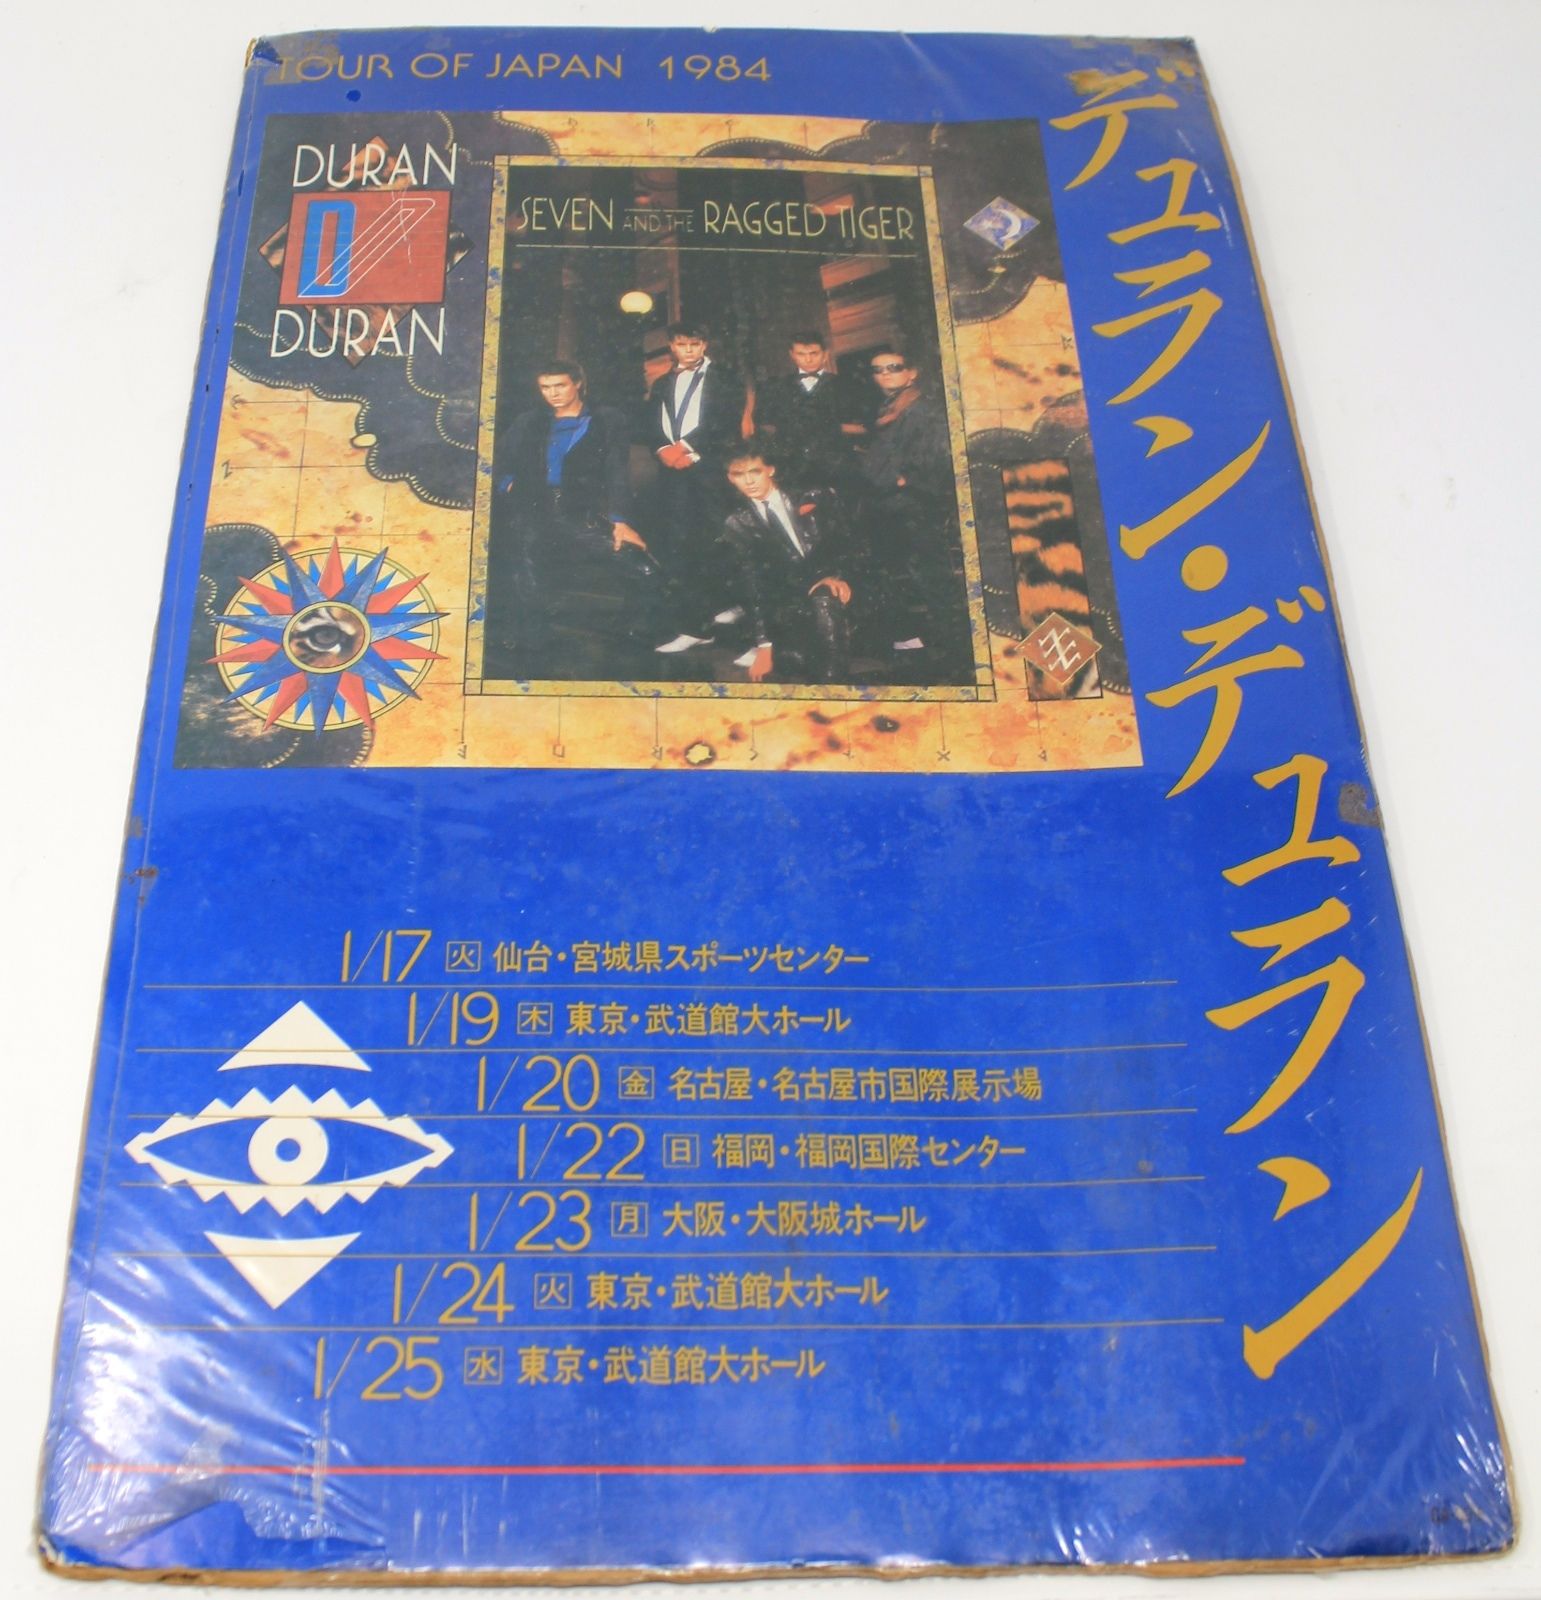 Vintage 1984 Duran Duran Seven And The Ragged Tiger Tour Of Japan Concert Poster